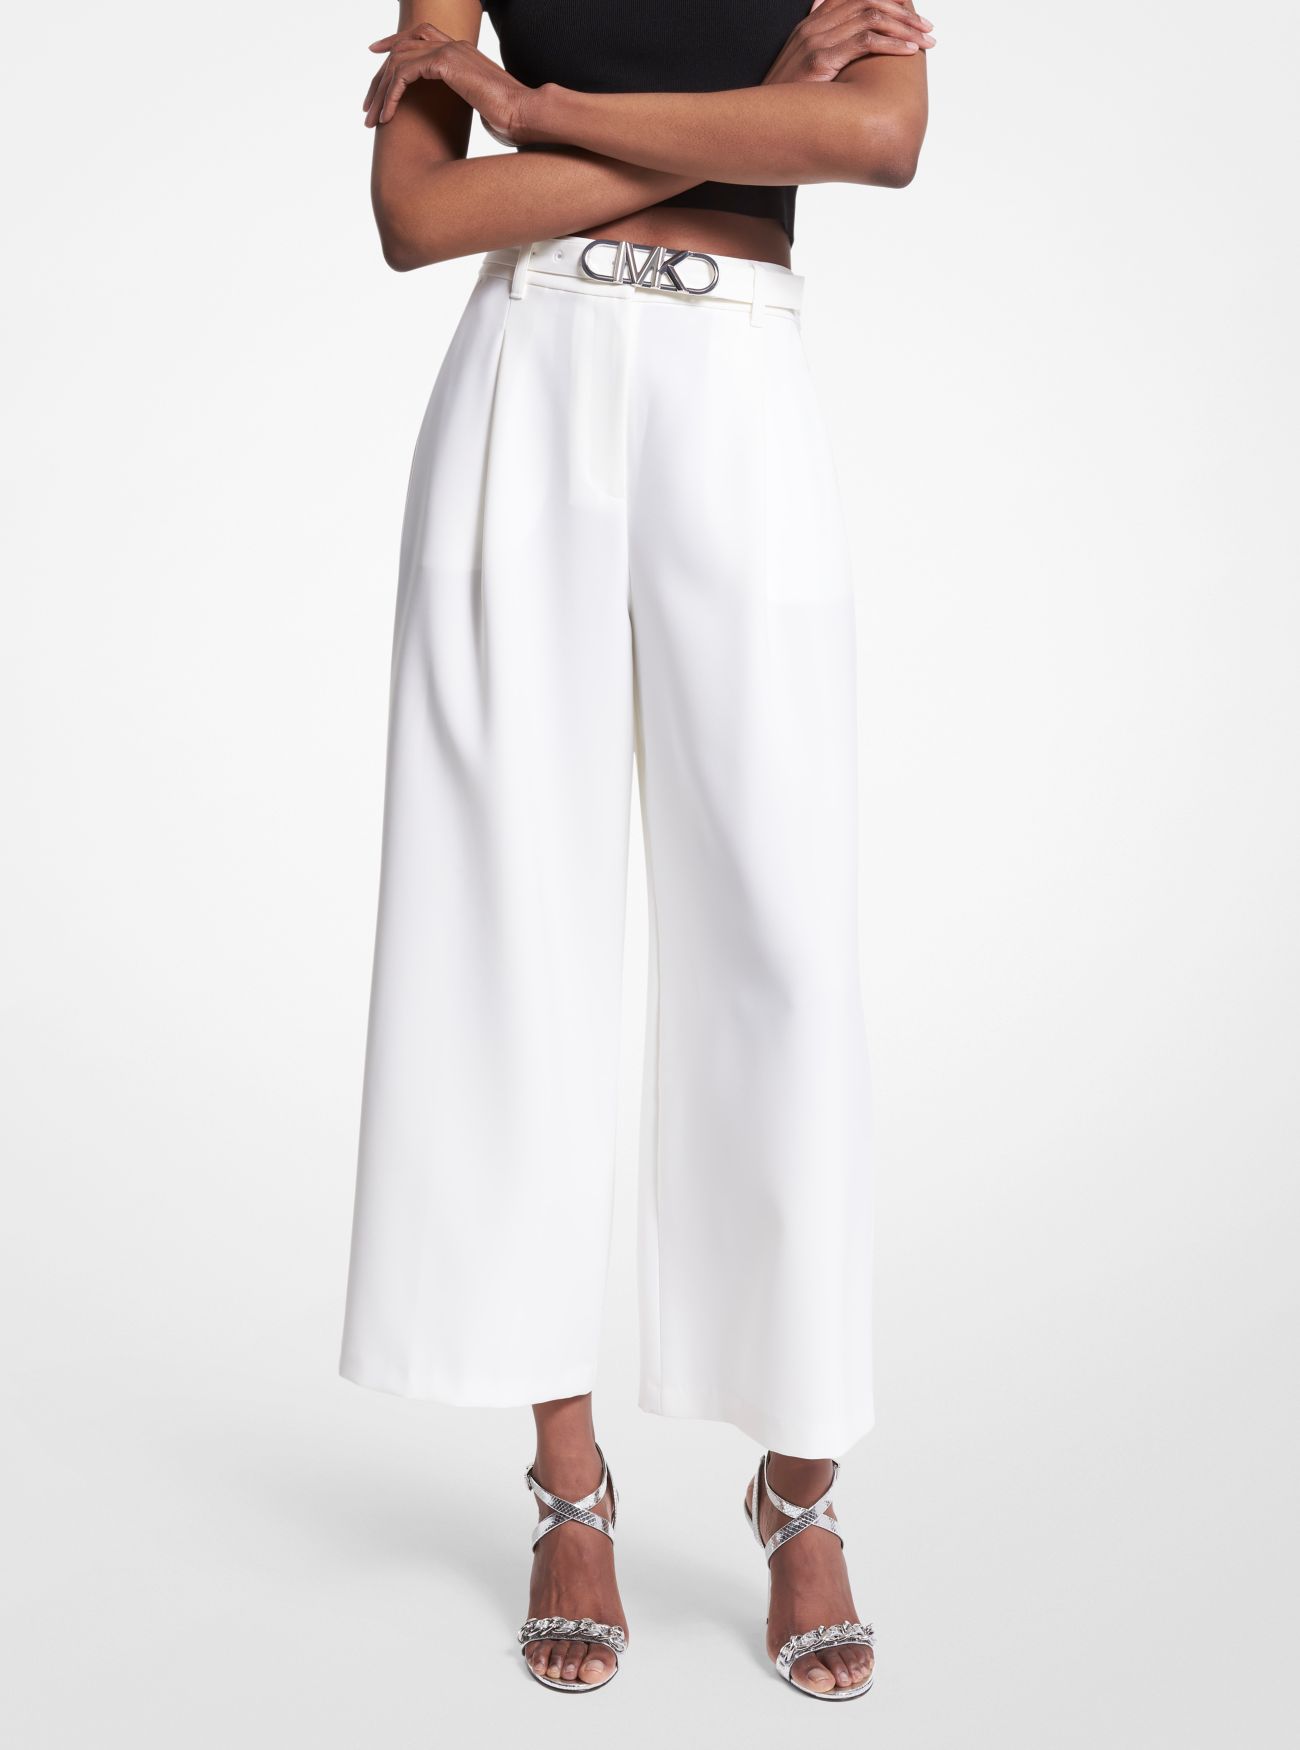 MK Cropped Stretch Twill Belted Trousers - White - Michael Kors